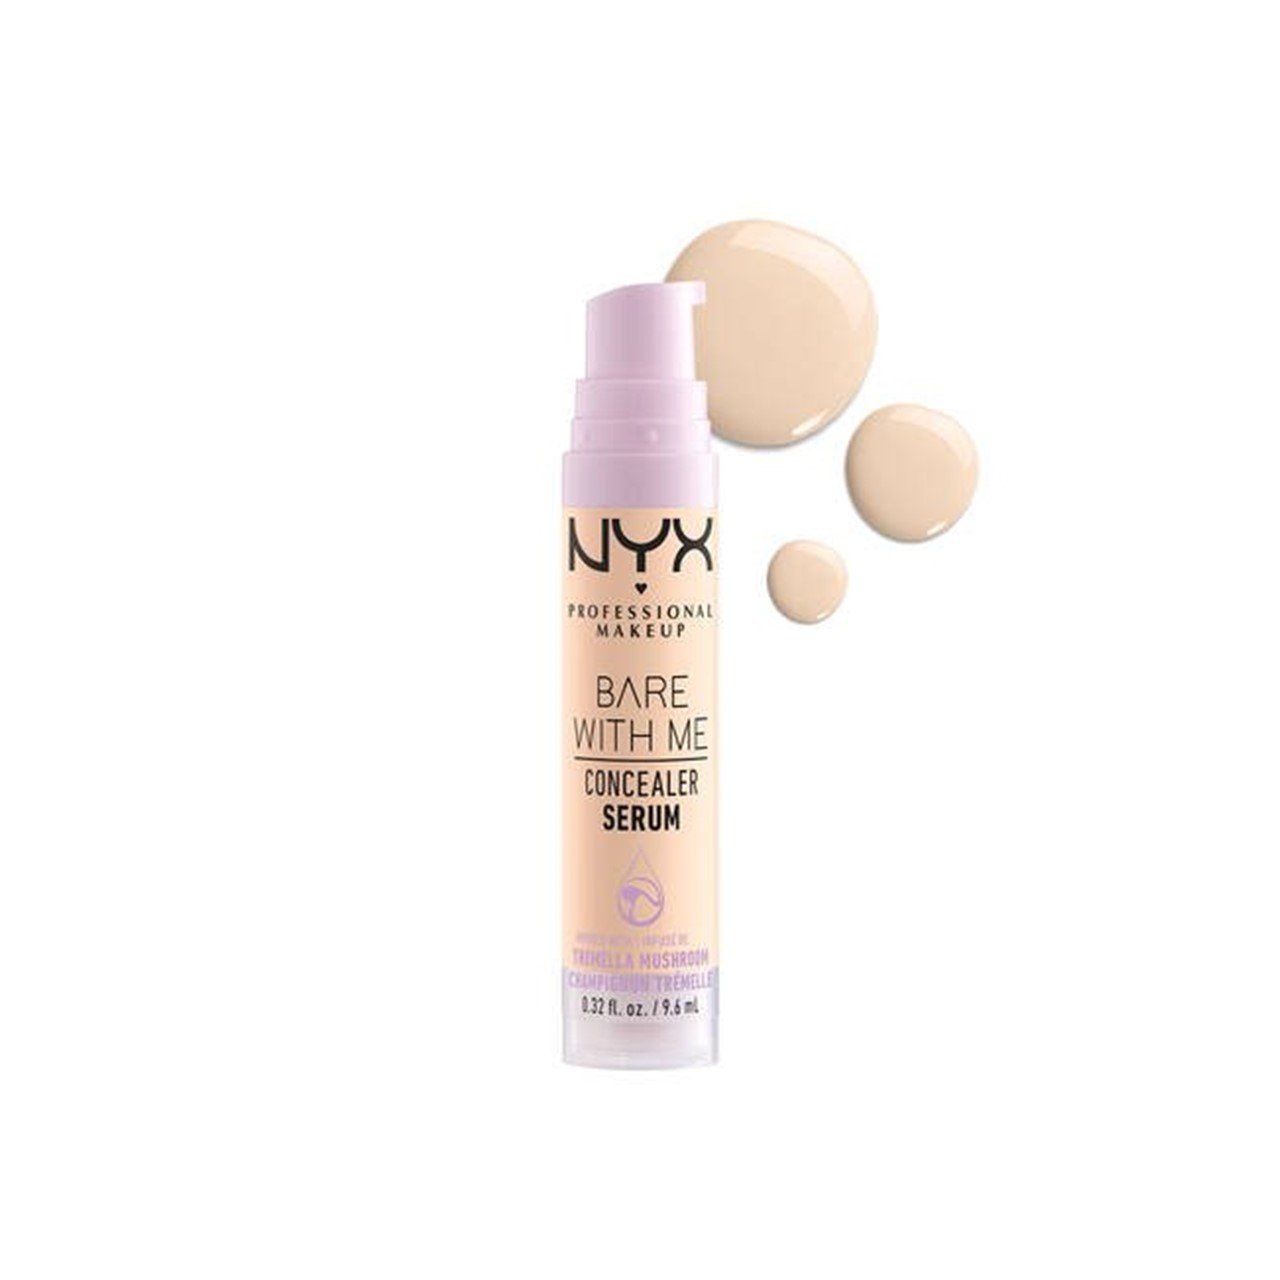 NYX Pro Makeup Bare With Me Concealer Serum 01 Fair 9.6ml